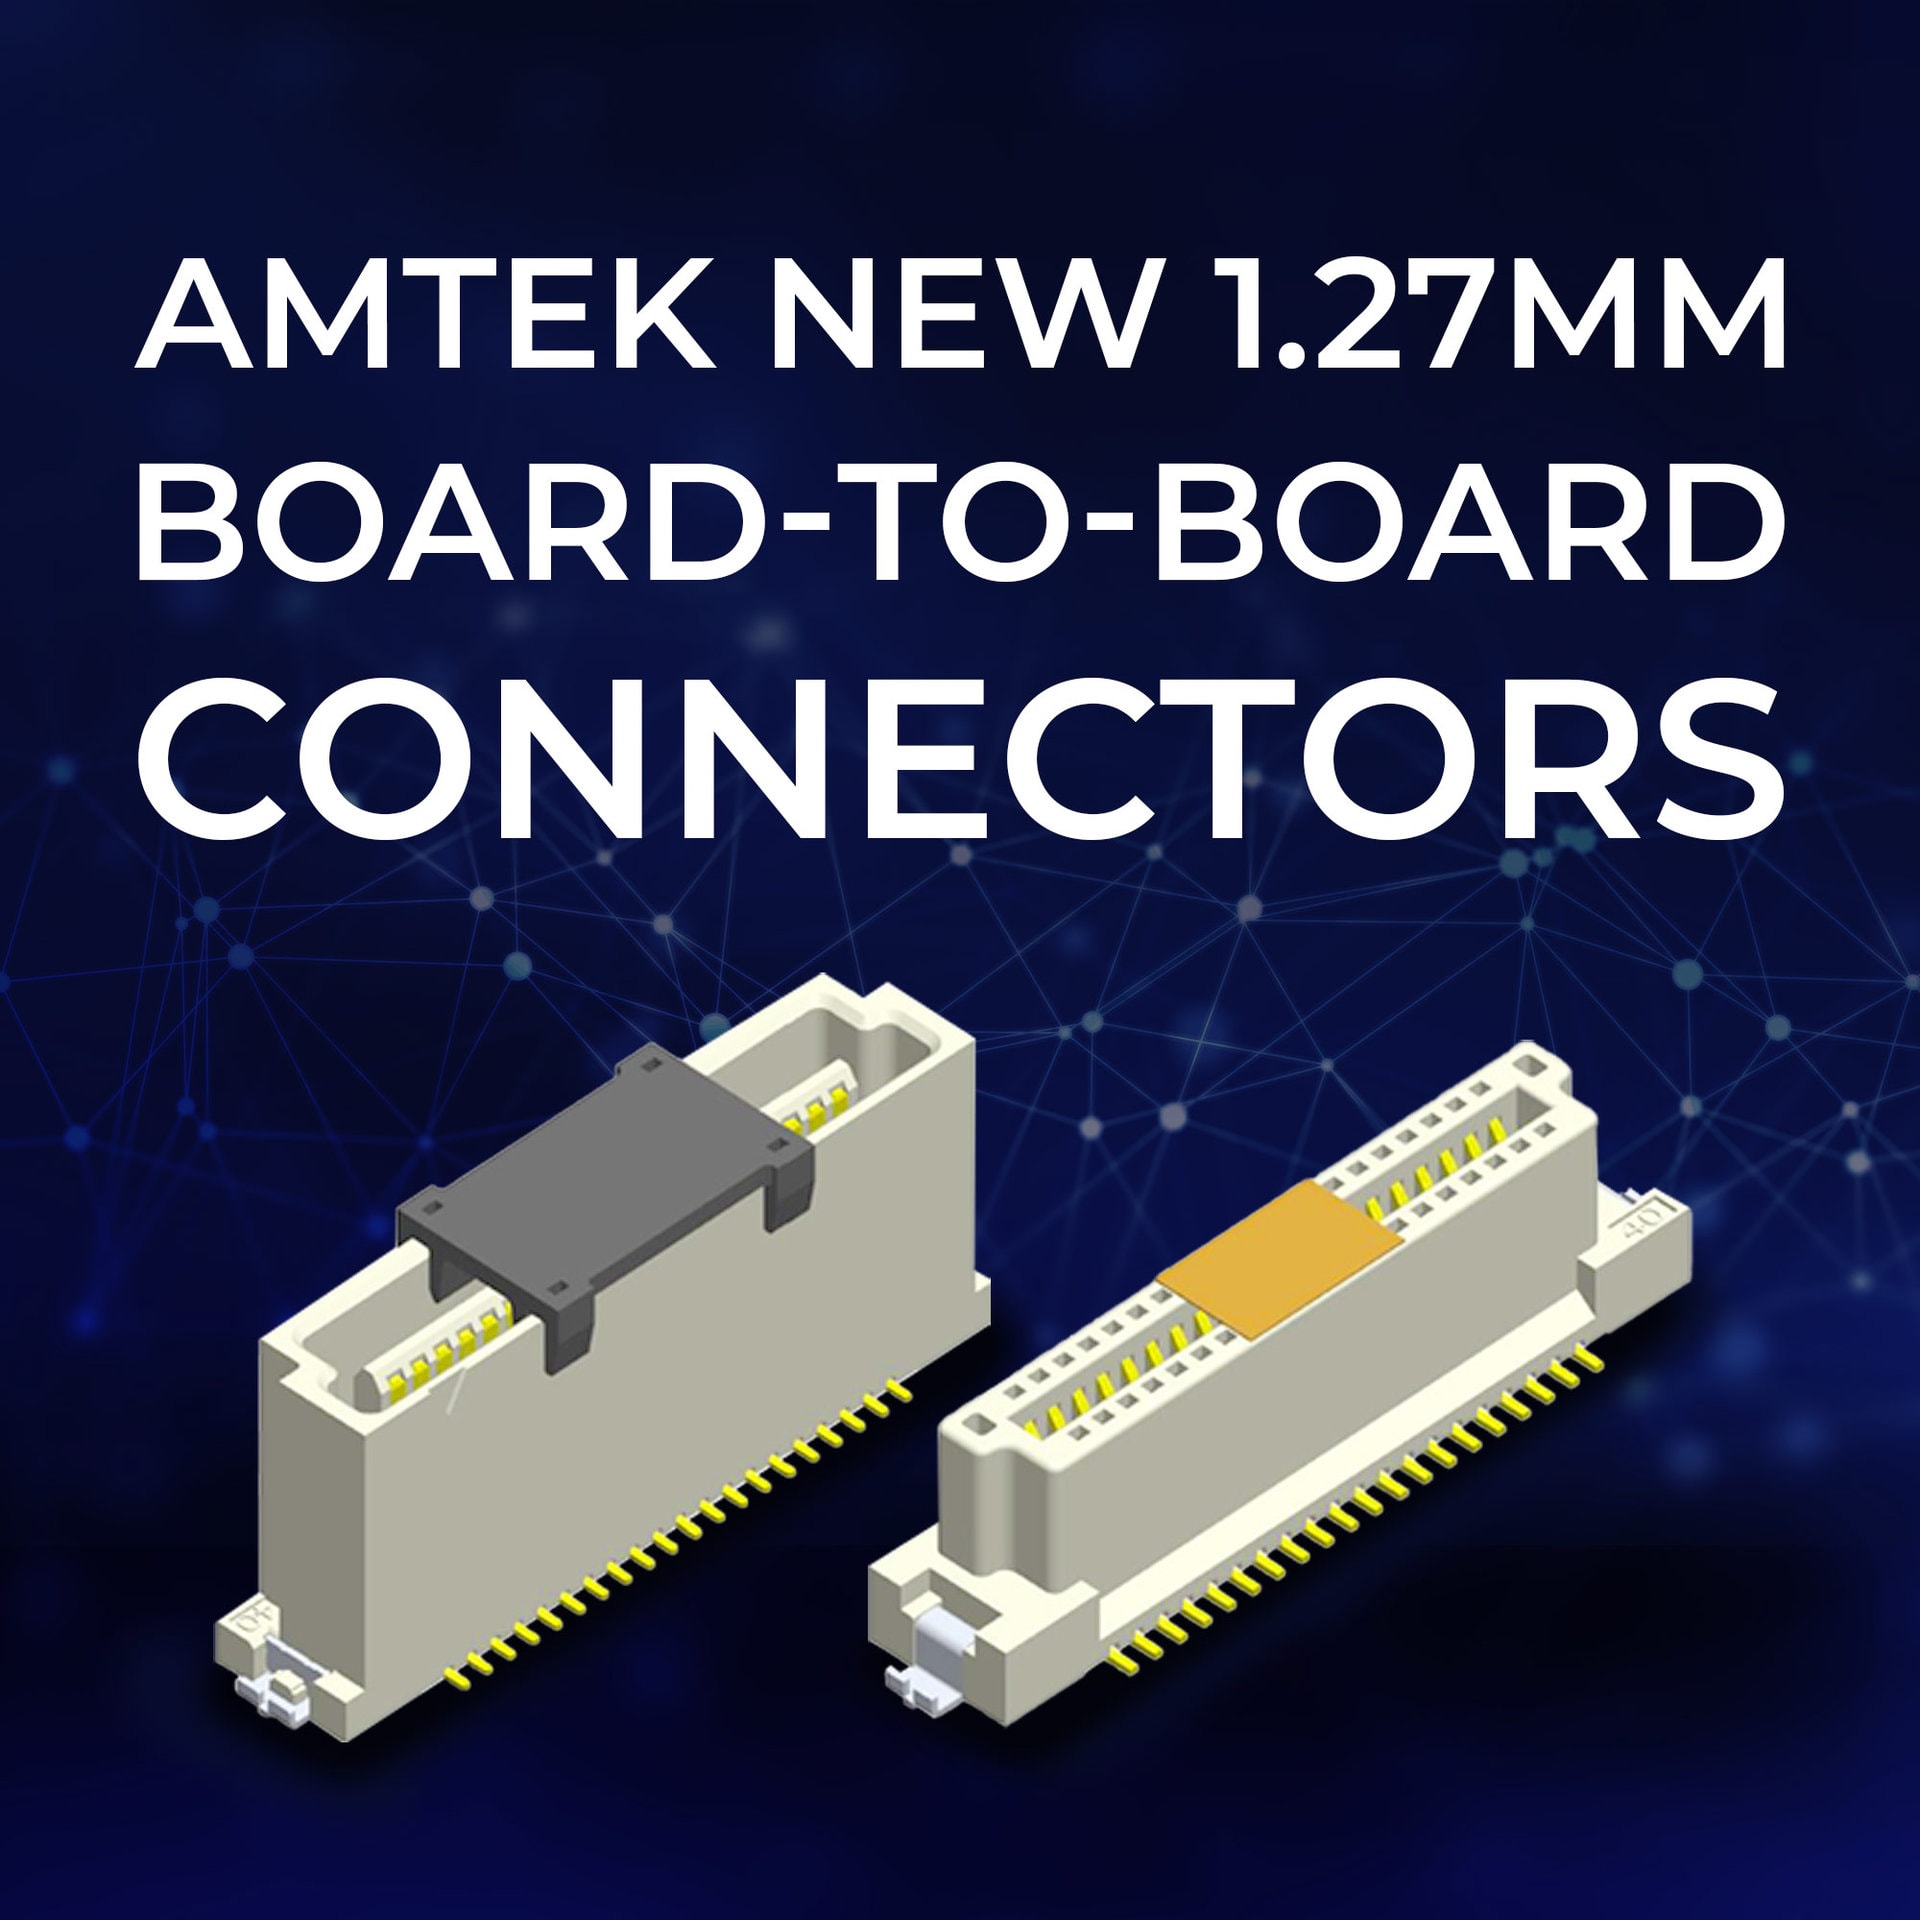 Amtek Introduces 1.27mm BTB Connectors with Multiple Stacking Heights